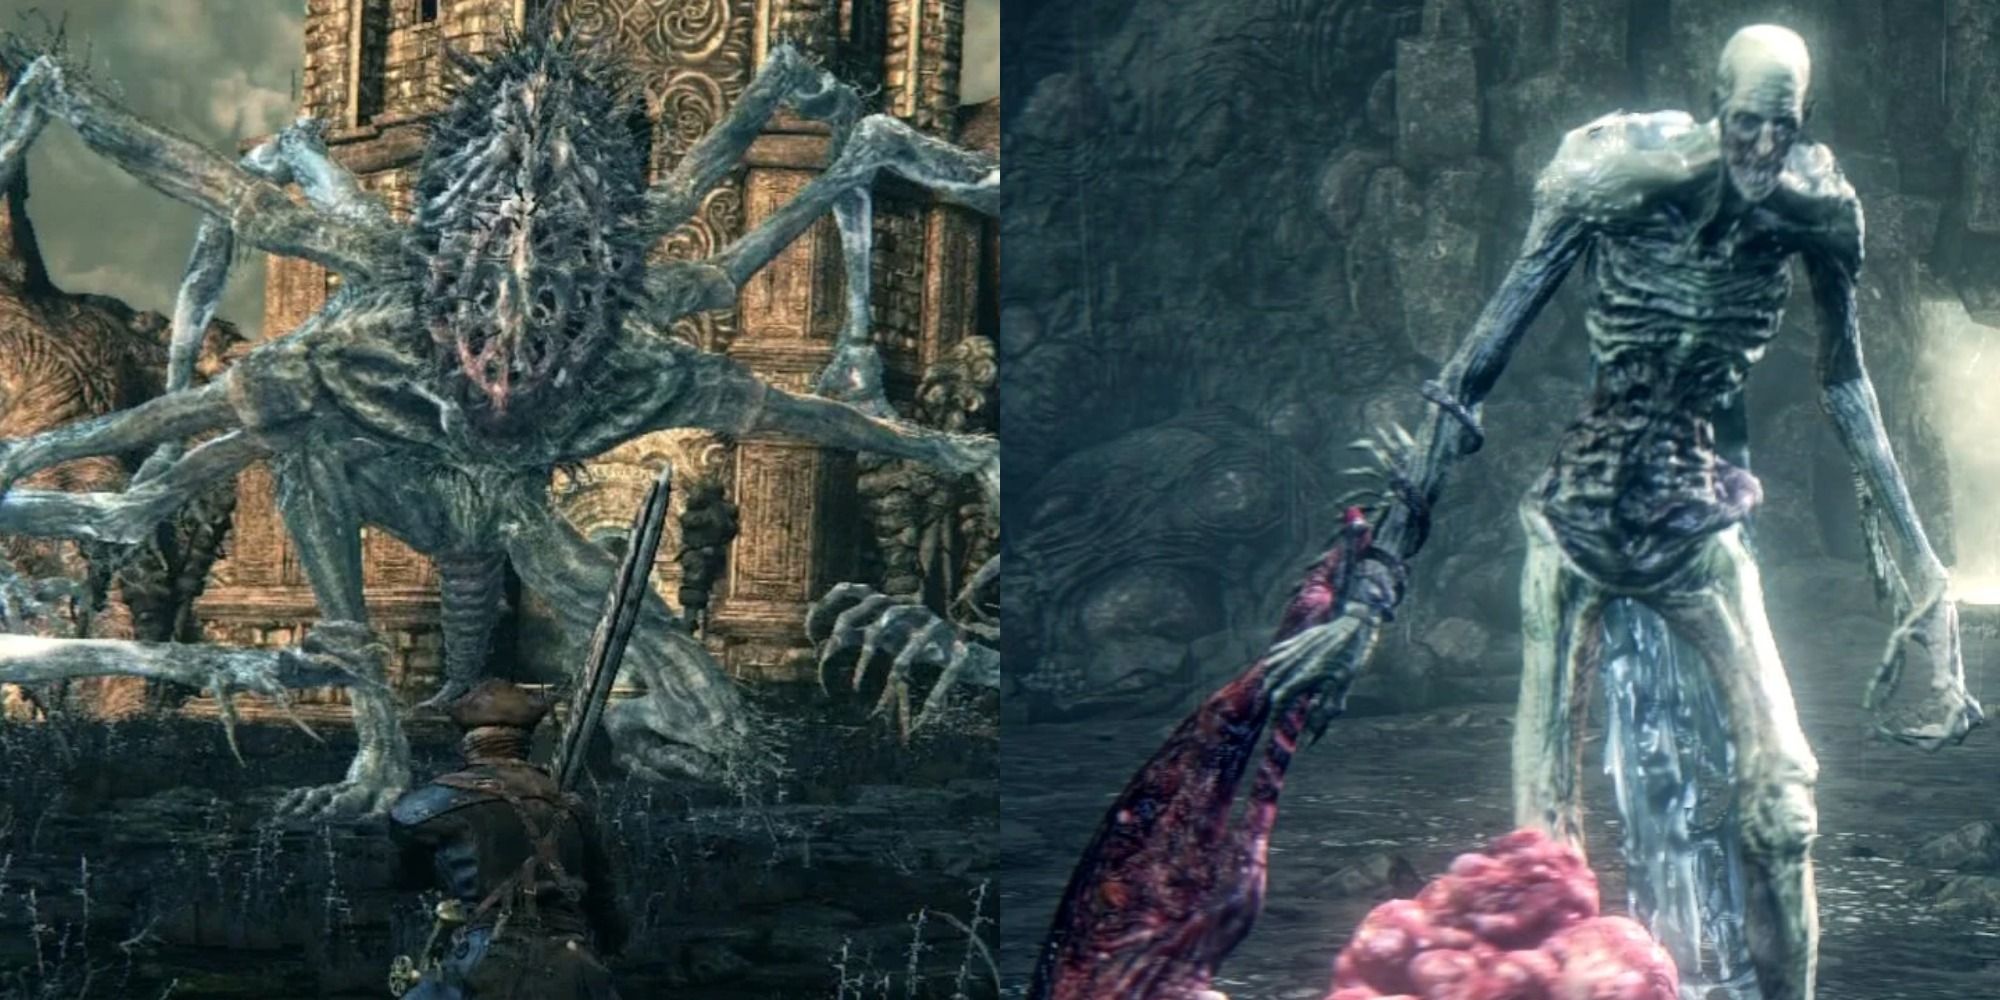 Split image showing Amygdala and the Orphan of Kos in Bloodborne.